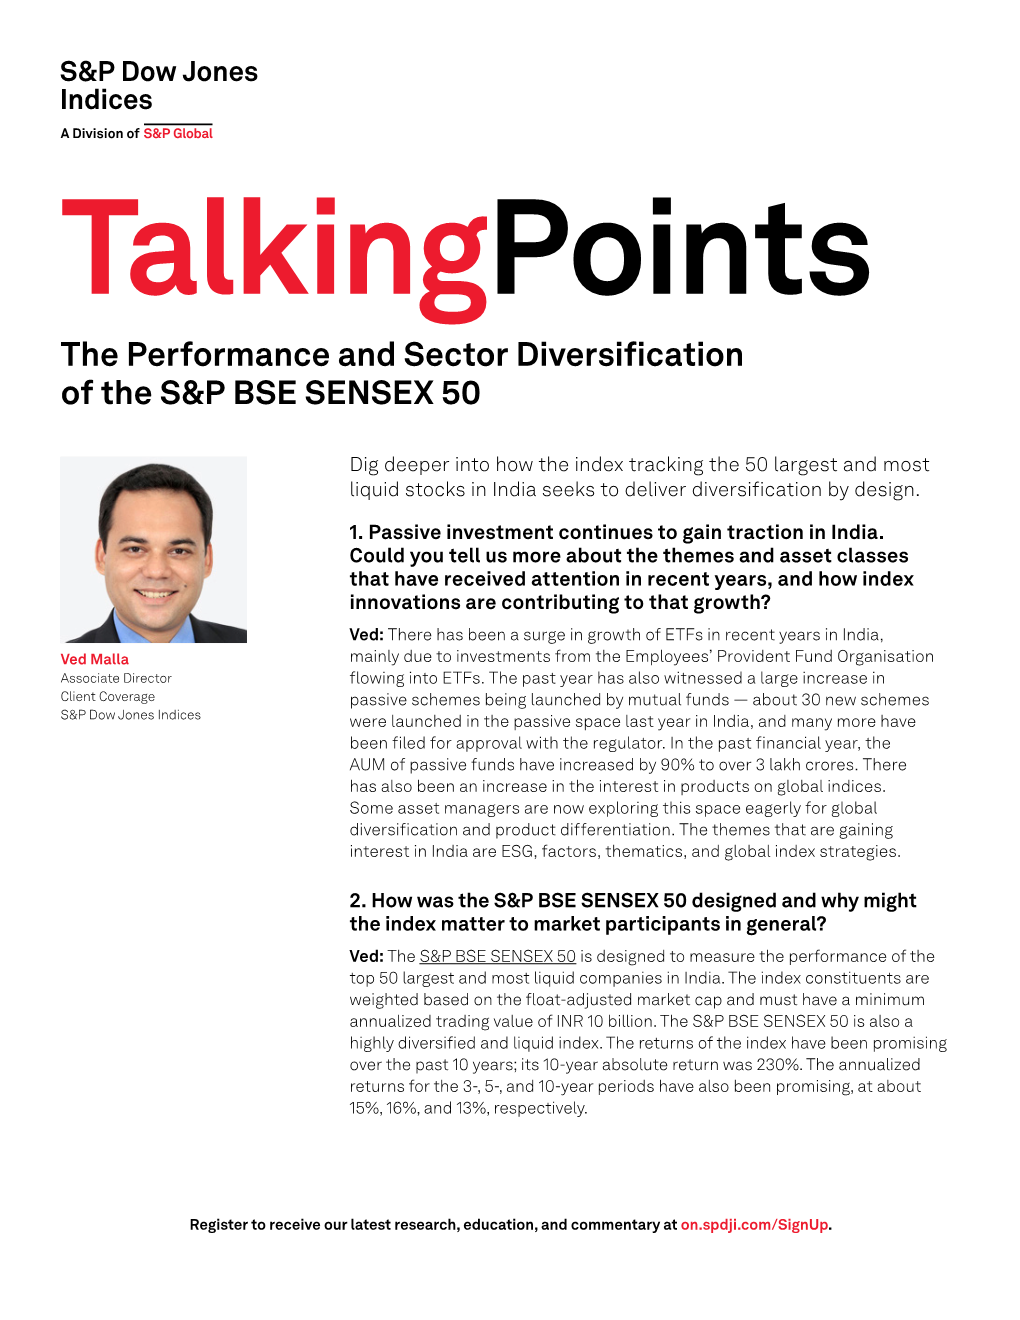 The Performance and Sector Diversification of the S&P BSE